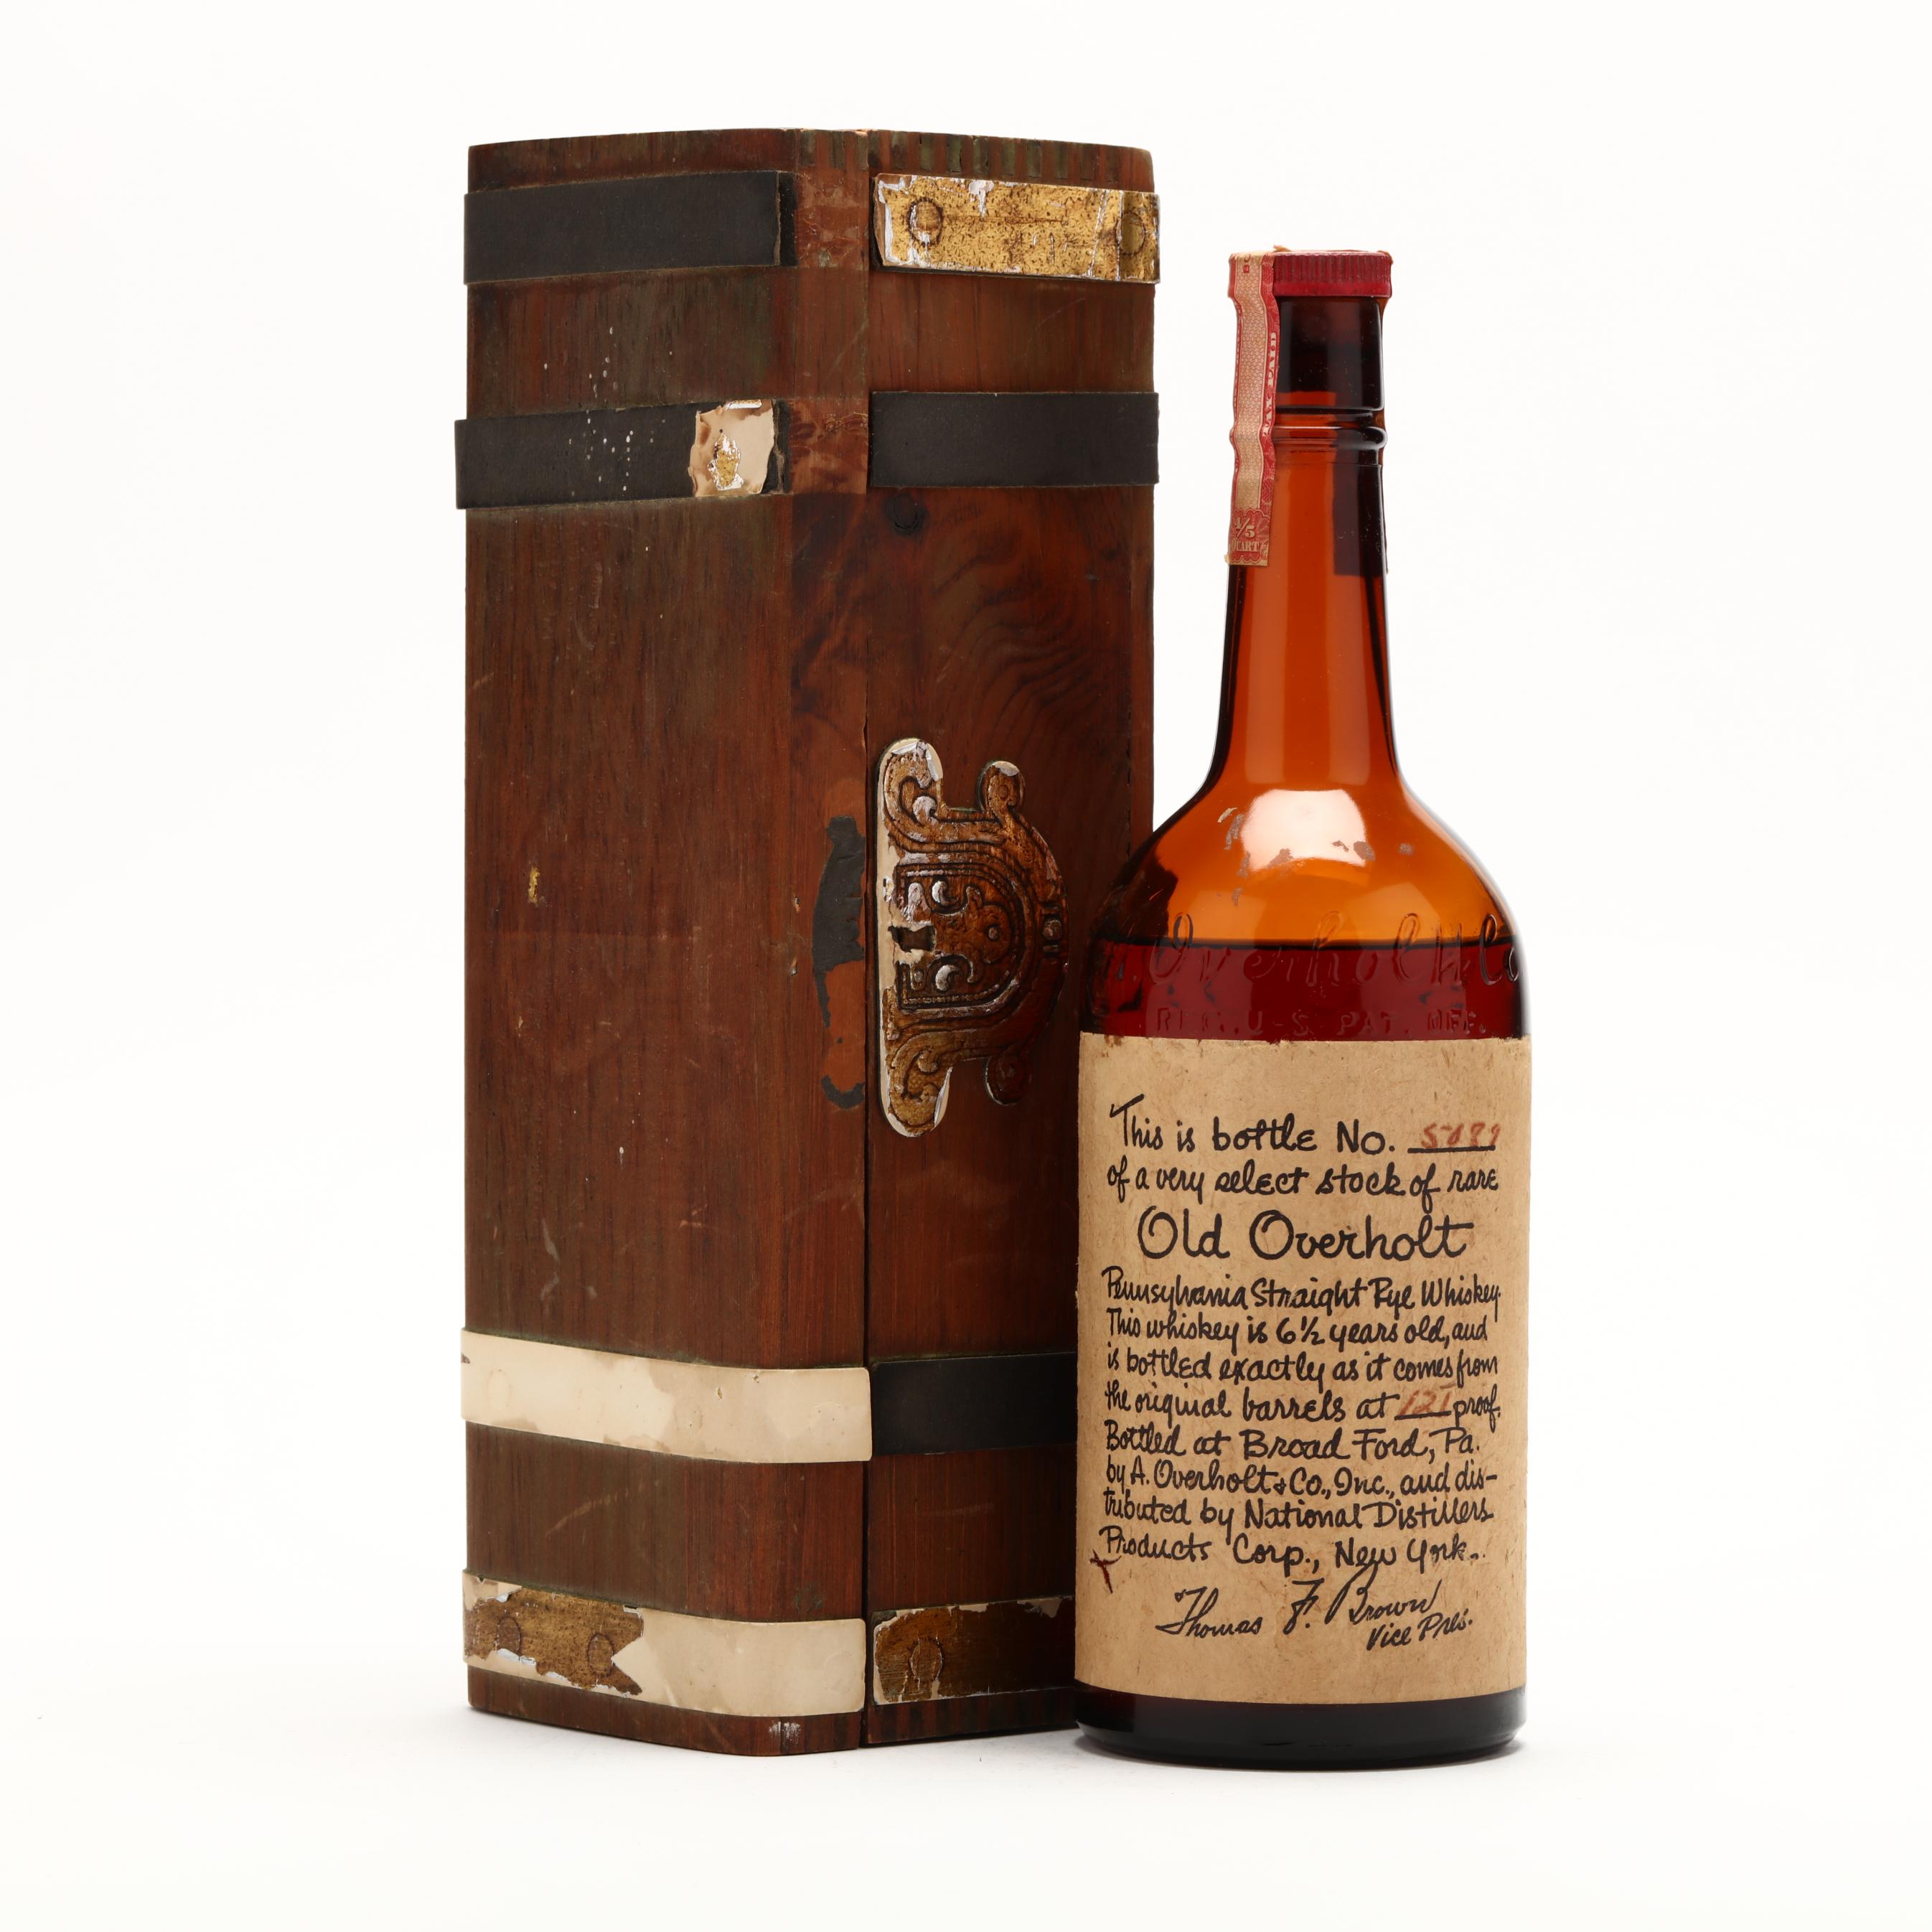 Sold at Auction: Old Overholt Rye Whiskey wooden crate